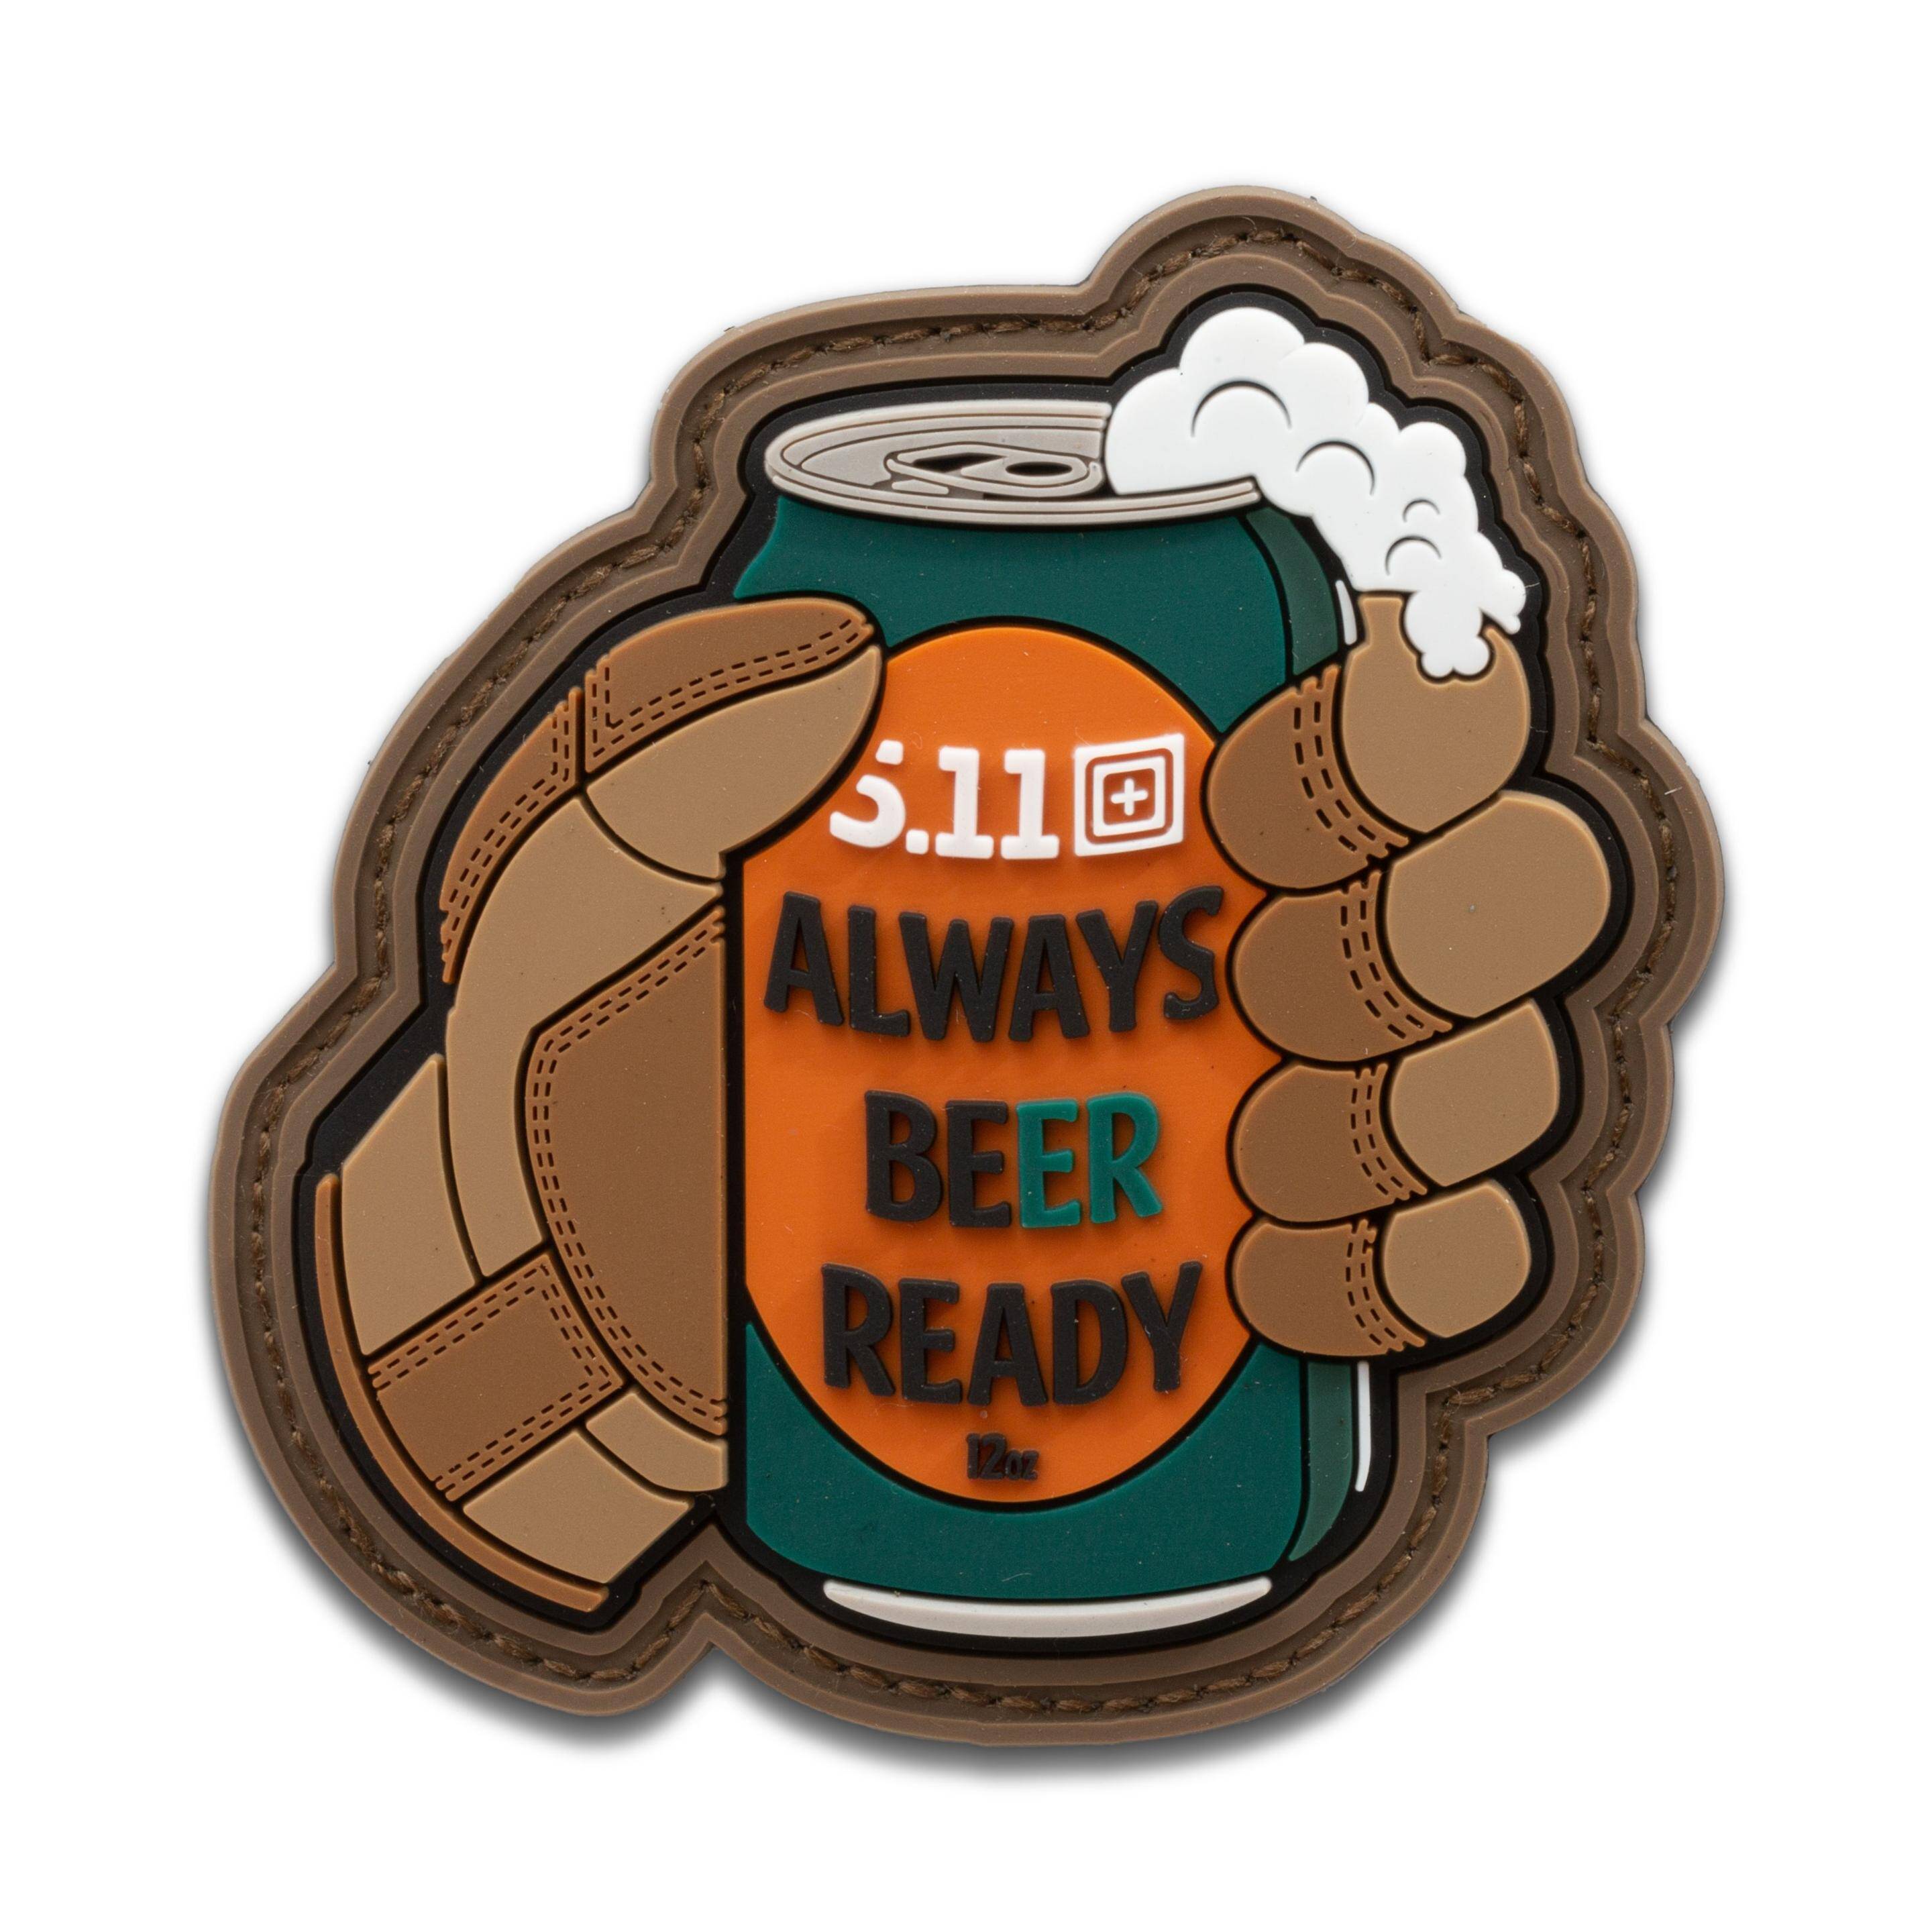 Patch 5.11 ALWAYS BEER READY PATCH